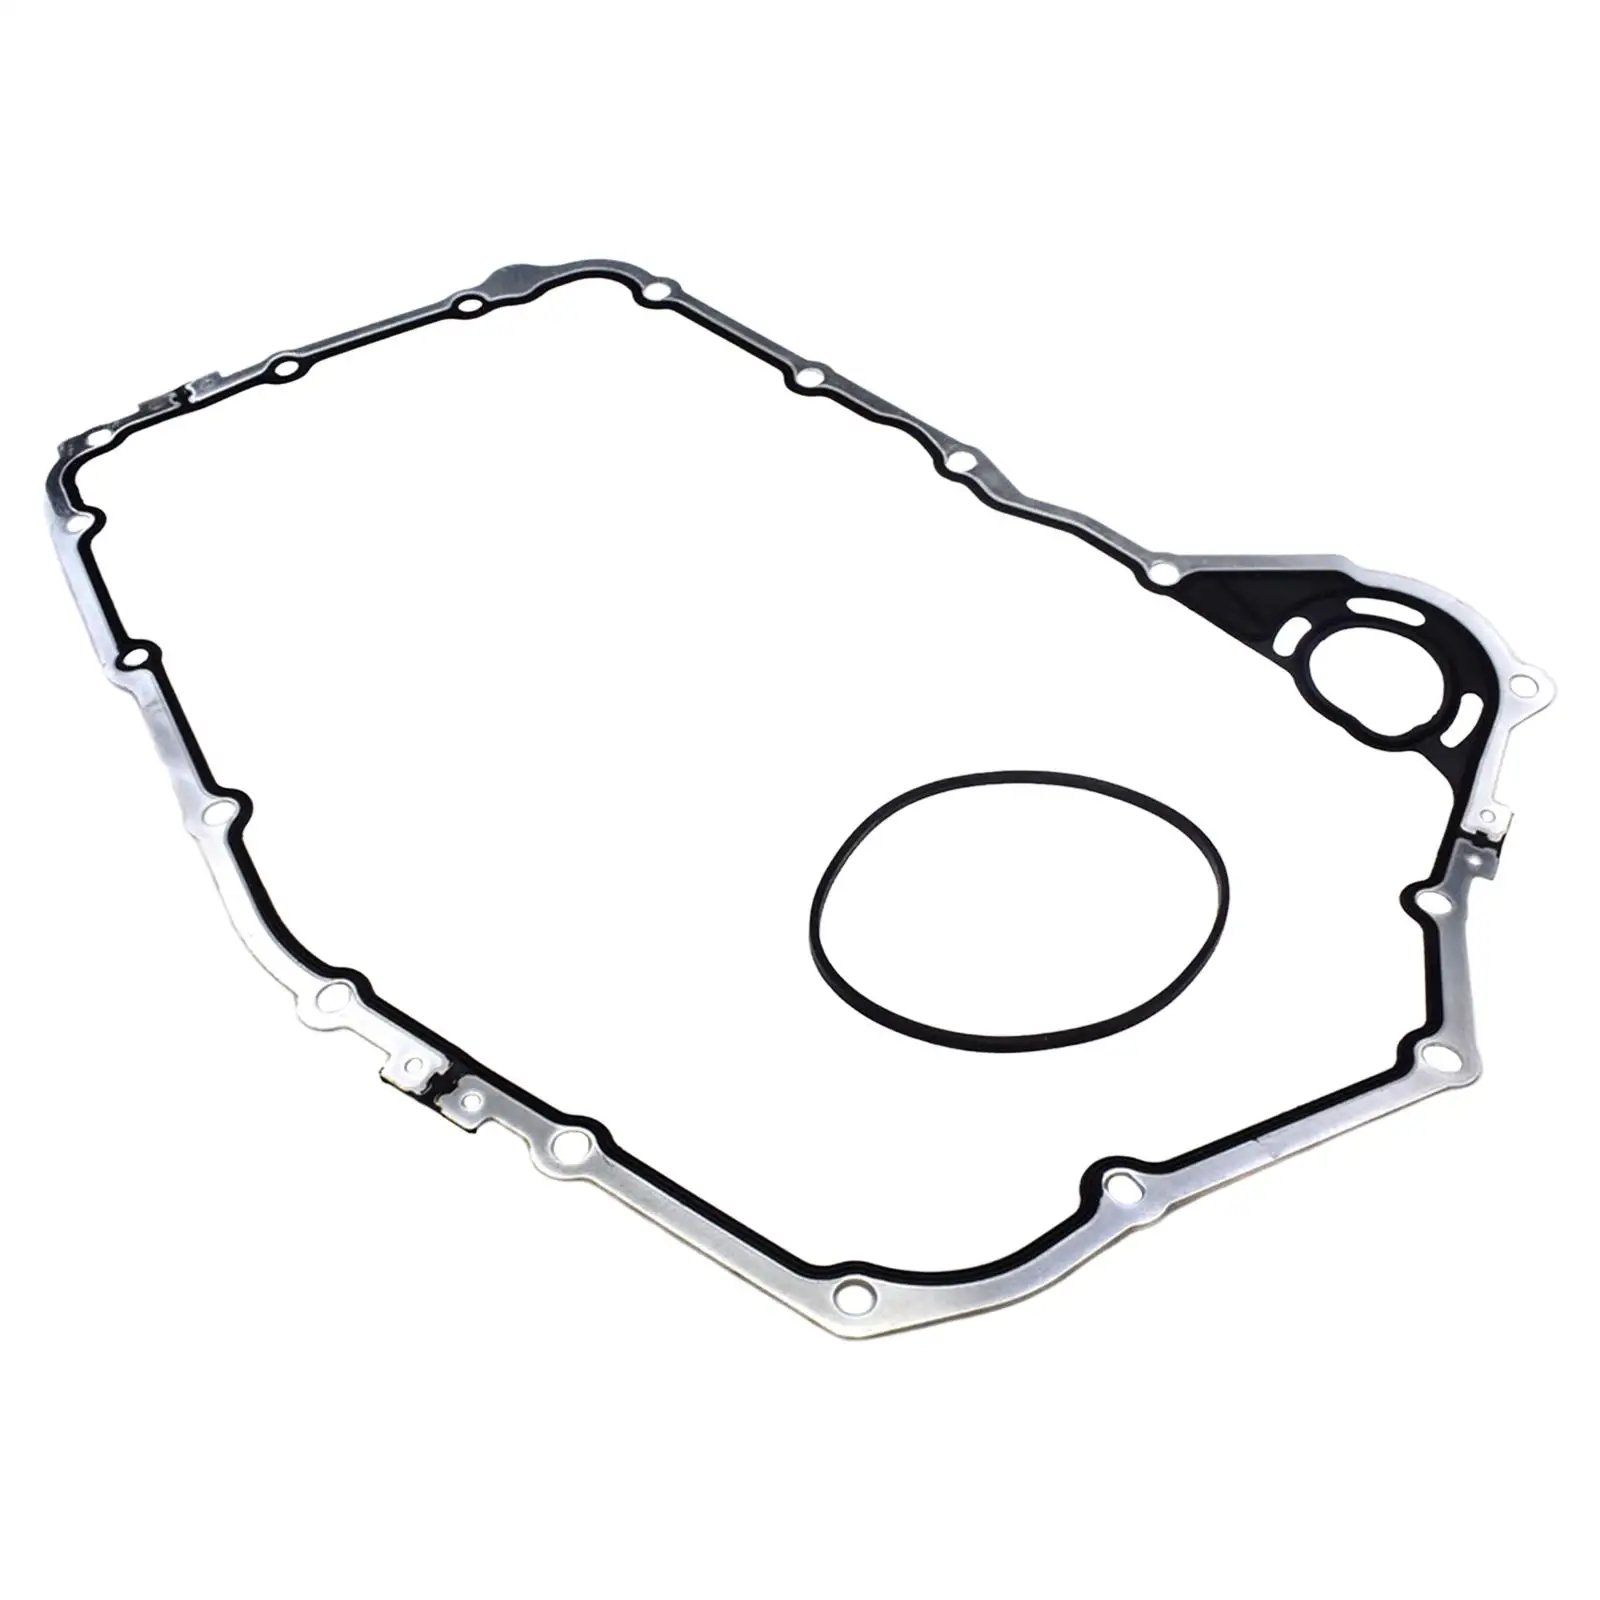 4T65E Automatic Transmission Case Gasket Side , 24206959 Car Accessory, Rubber